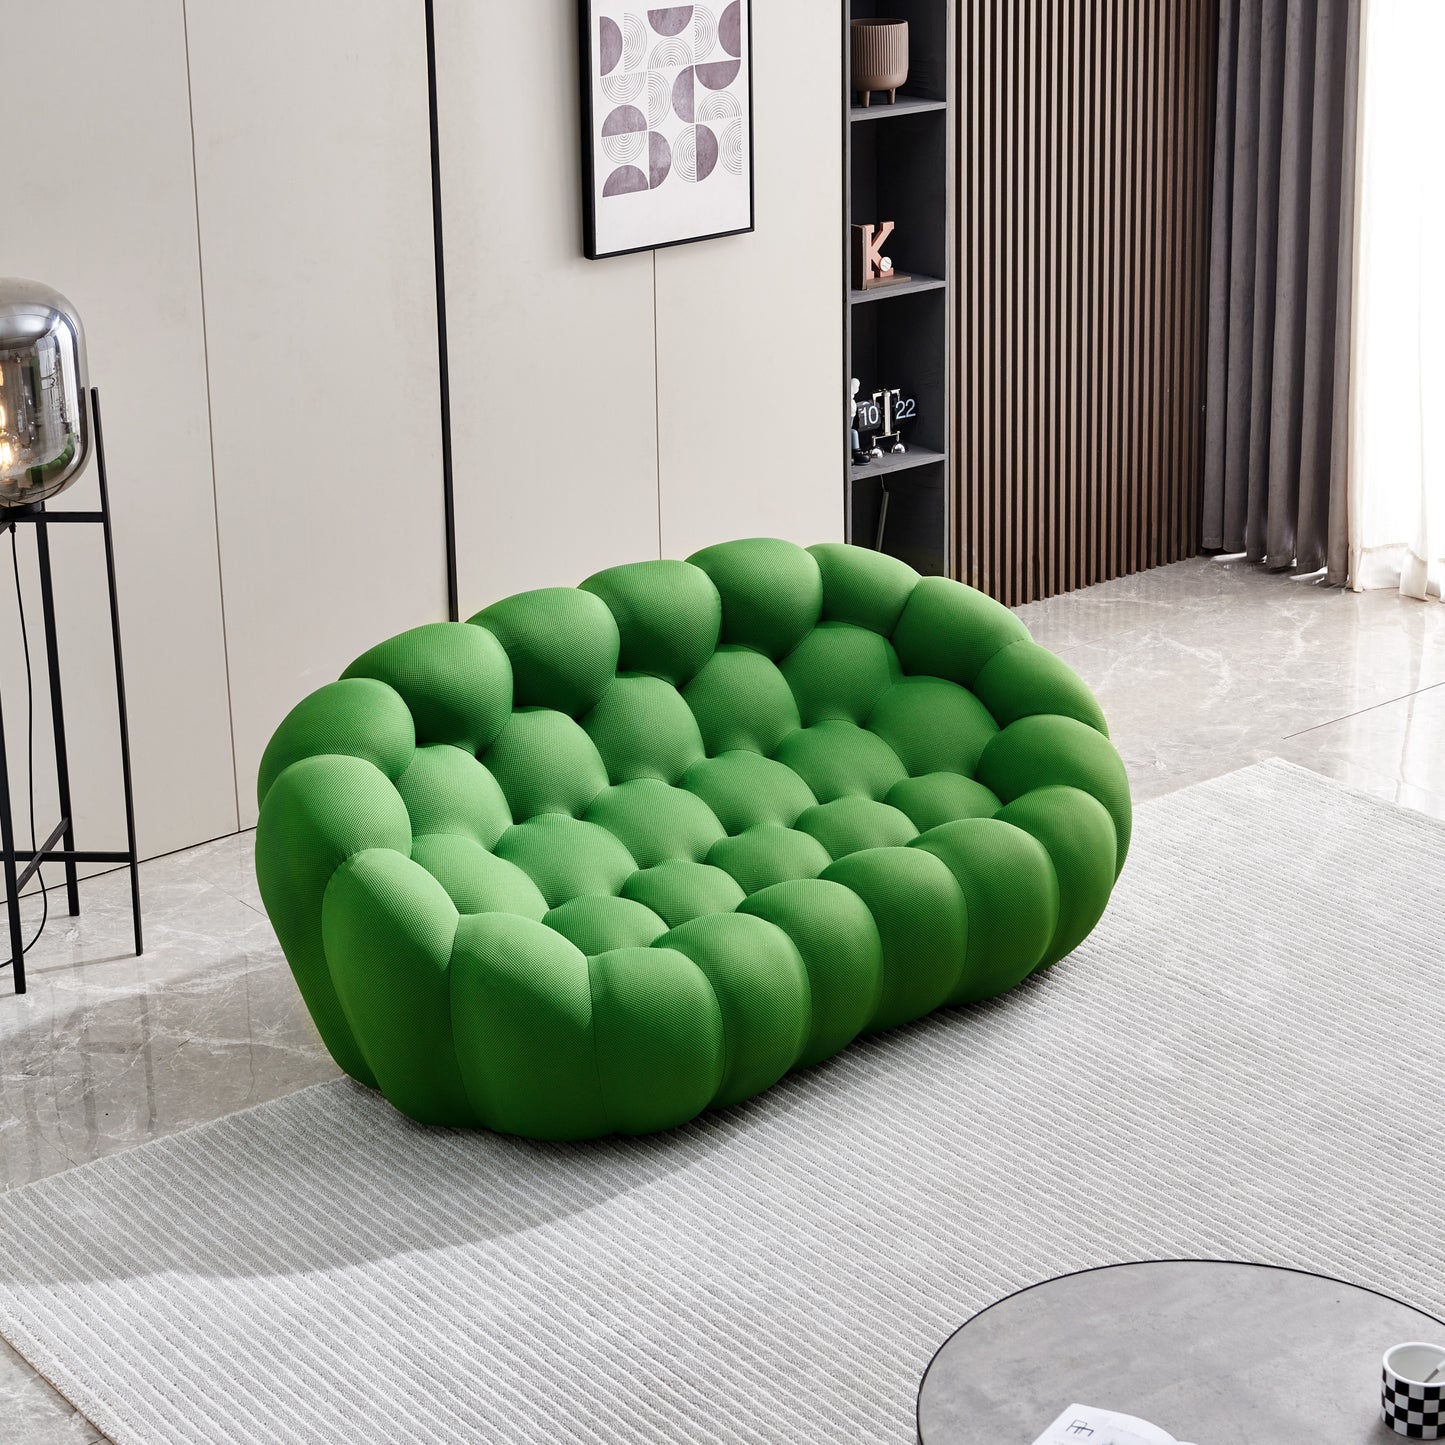 Styling foam whit mesh fabricleisure sofa,Floor oft,modern armless recliner with back,suitable for living room, apartment, bedroom and office.(Green)